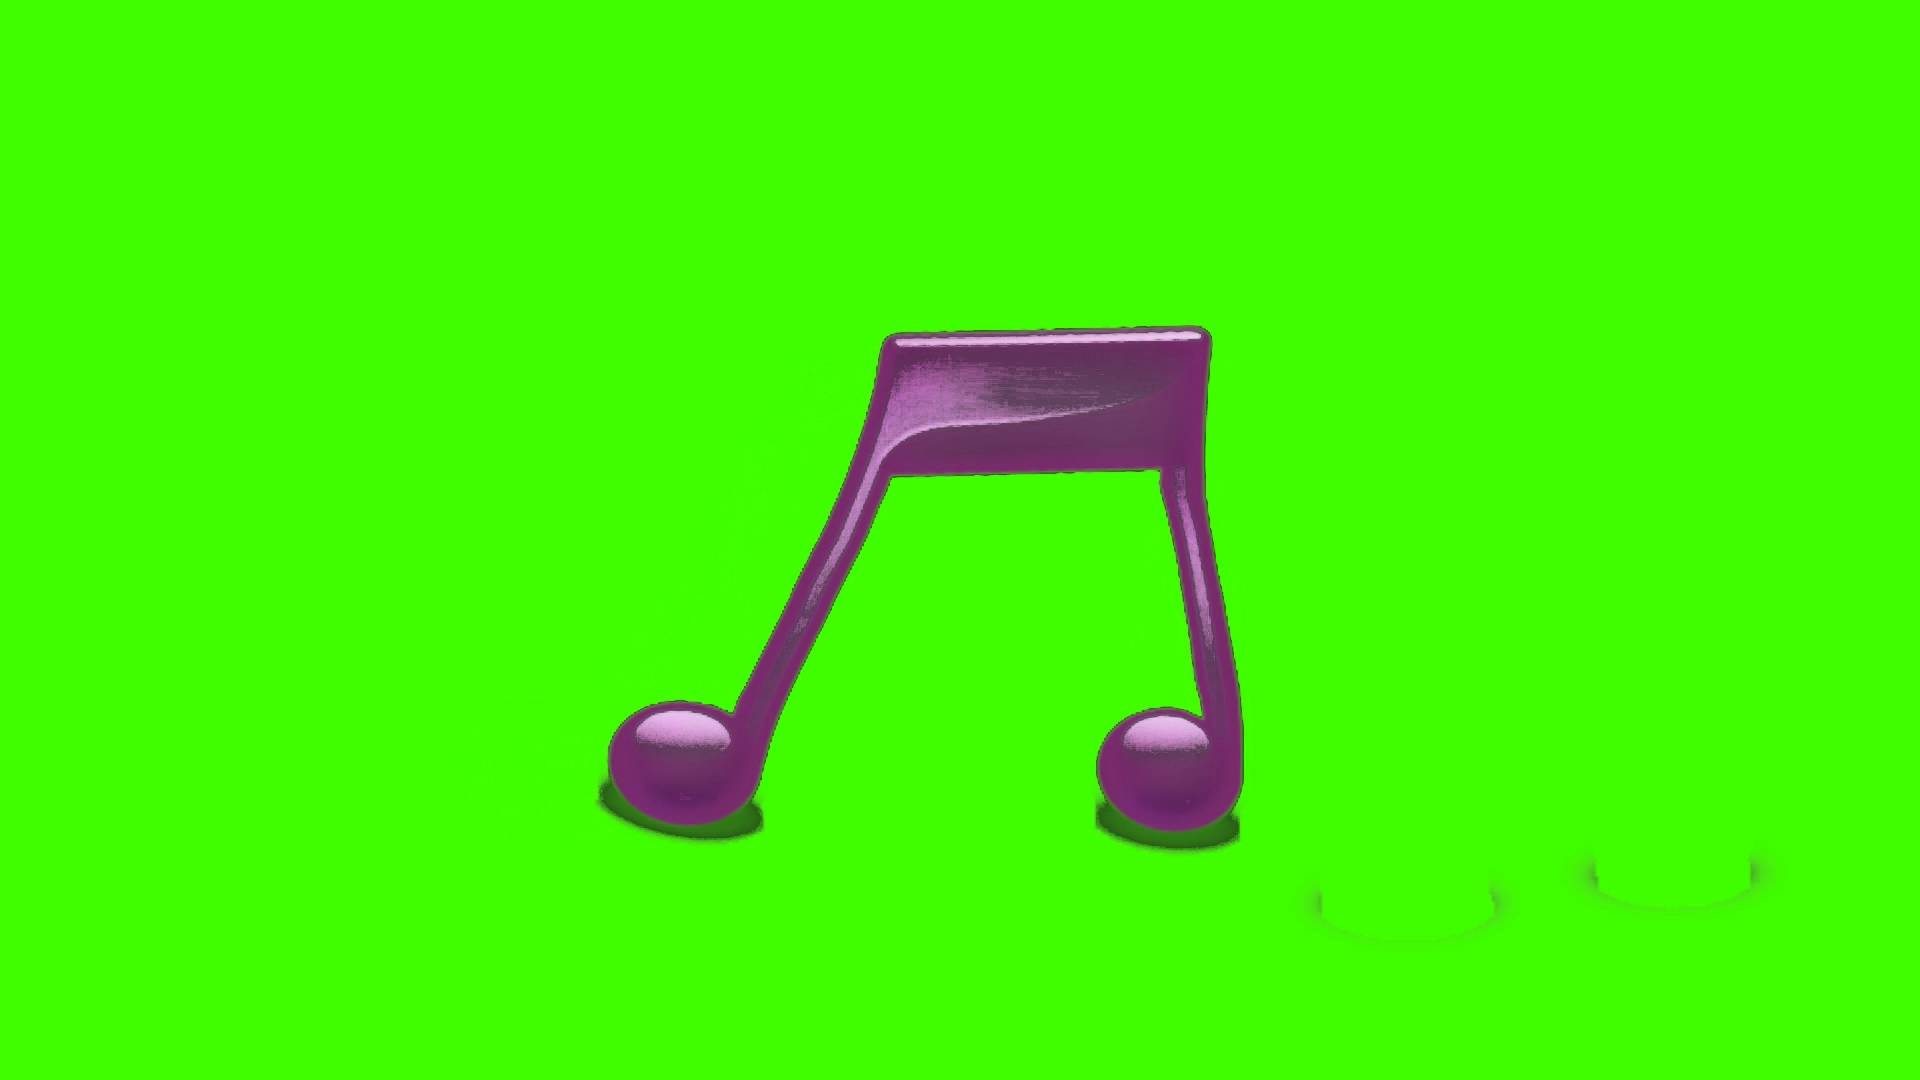 music note walking best animation green screen free royalty ...